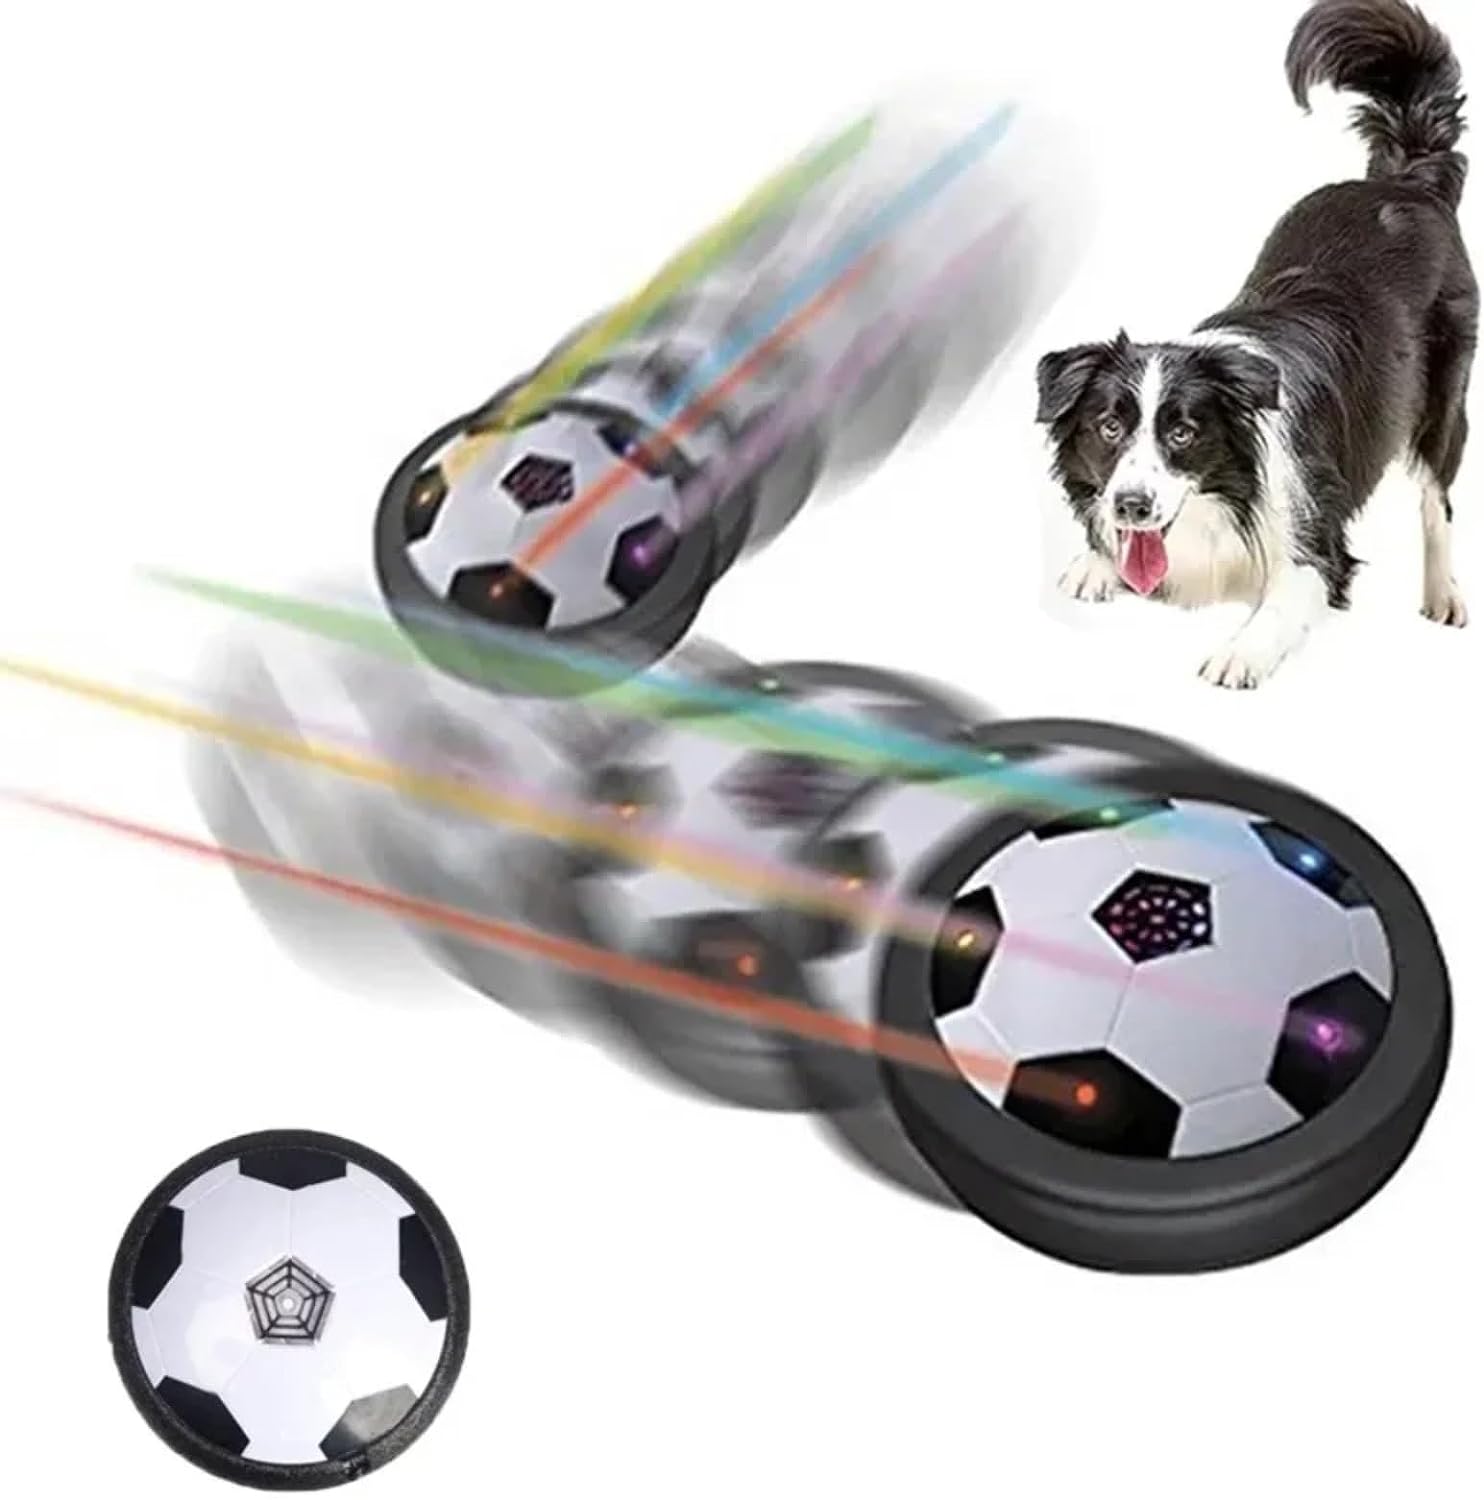 2023 New Active Gliding Disc – A Review of the Interactive Dog Toy with Cool Lighting Effects